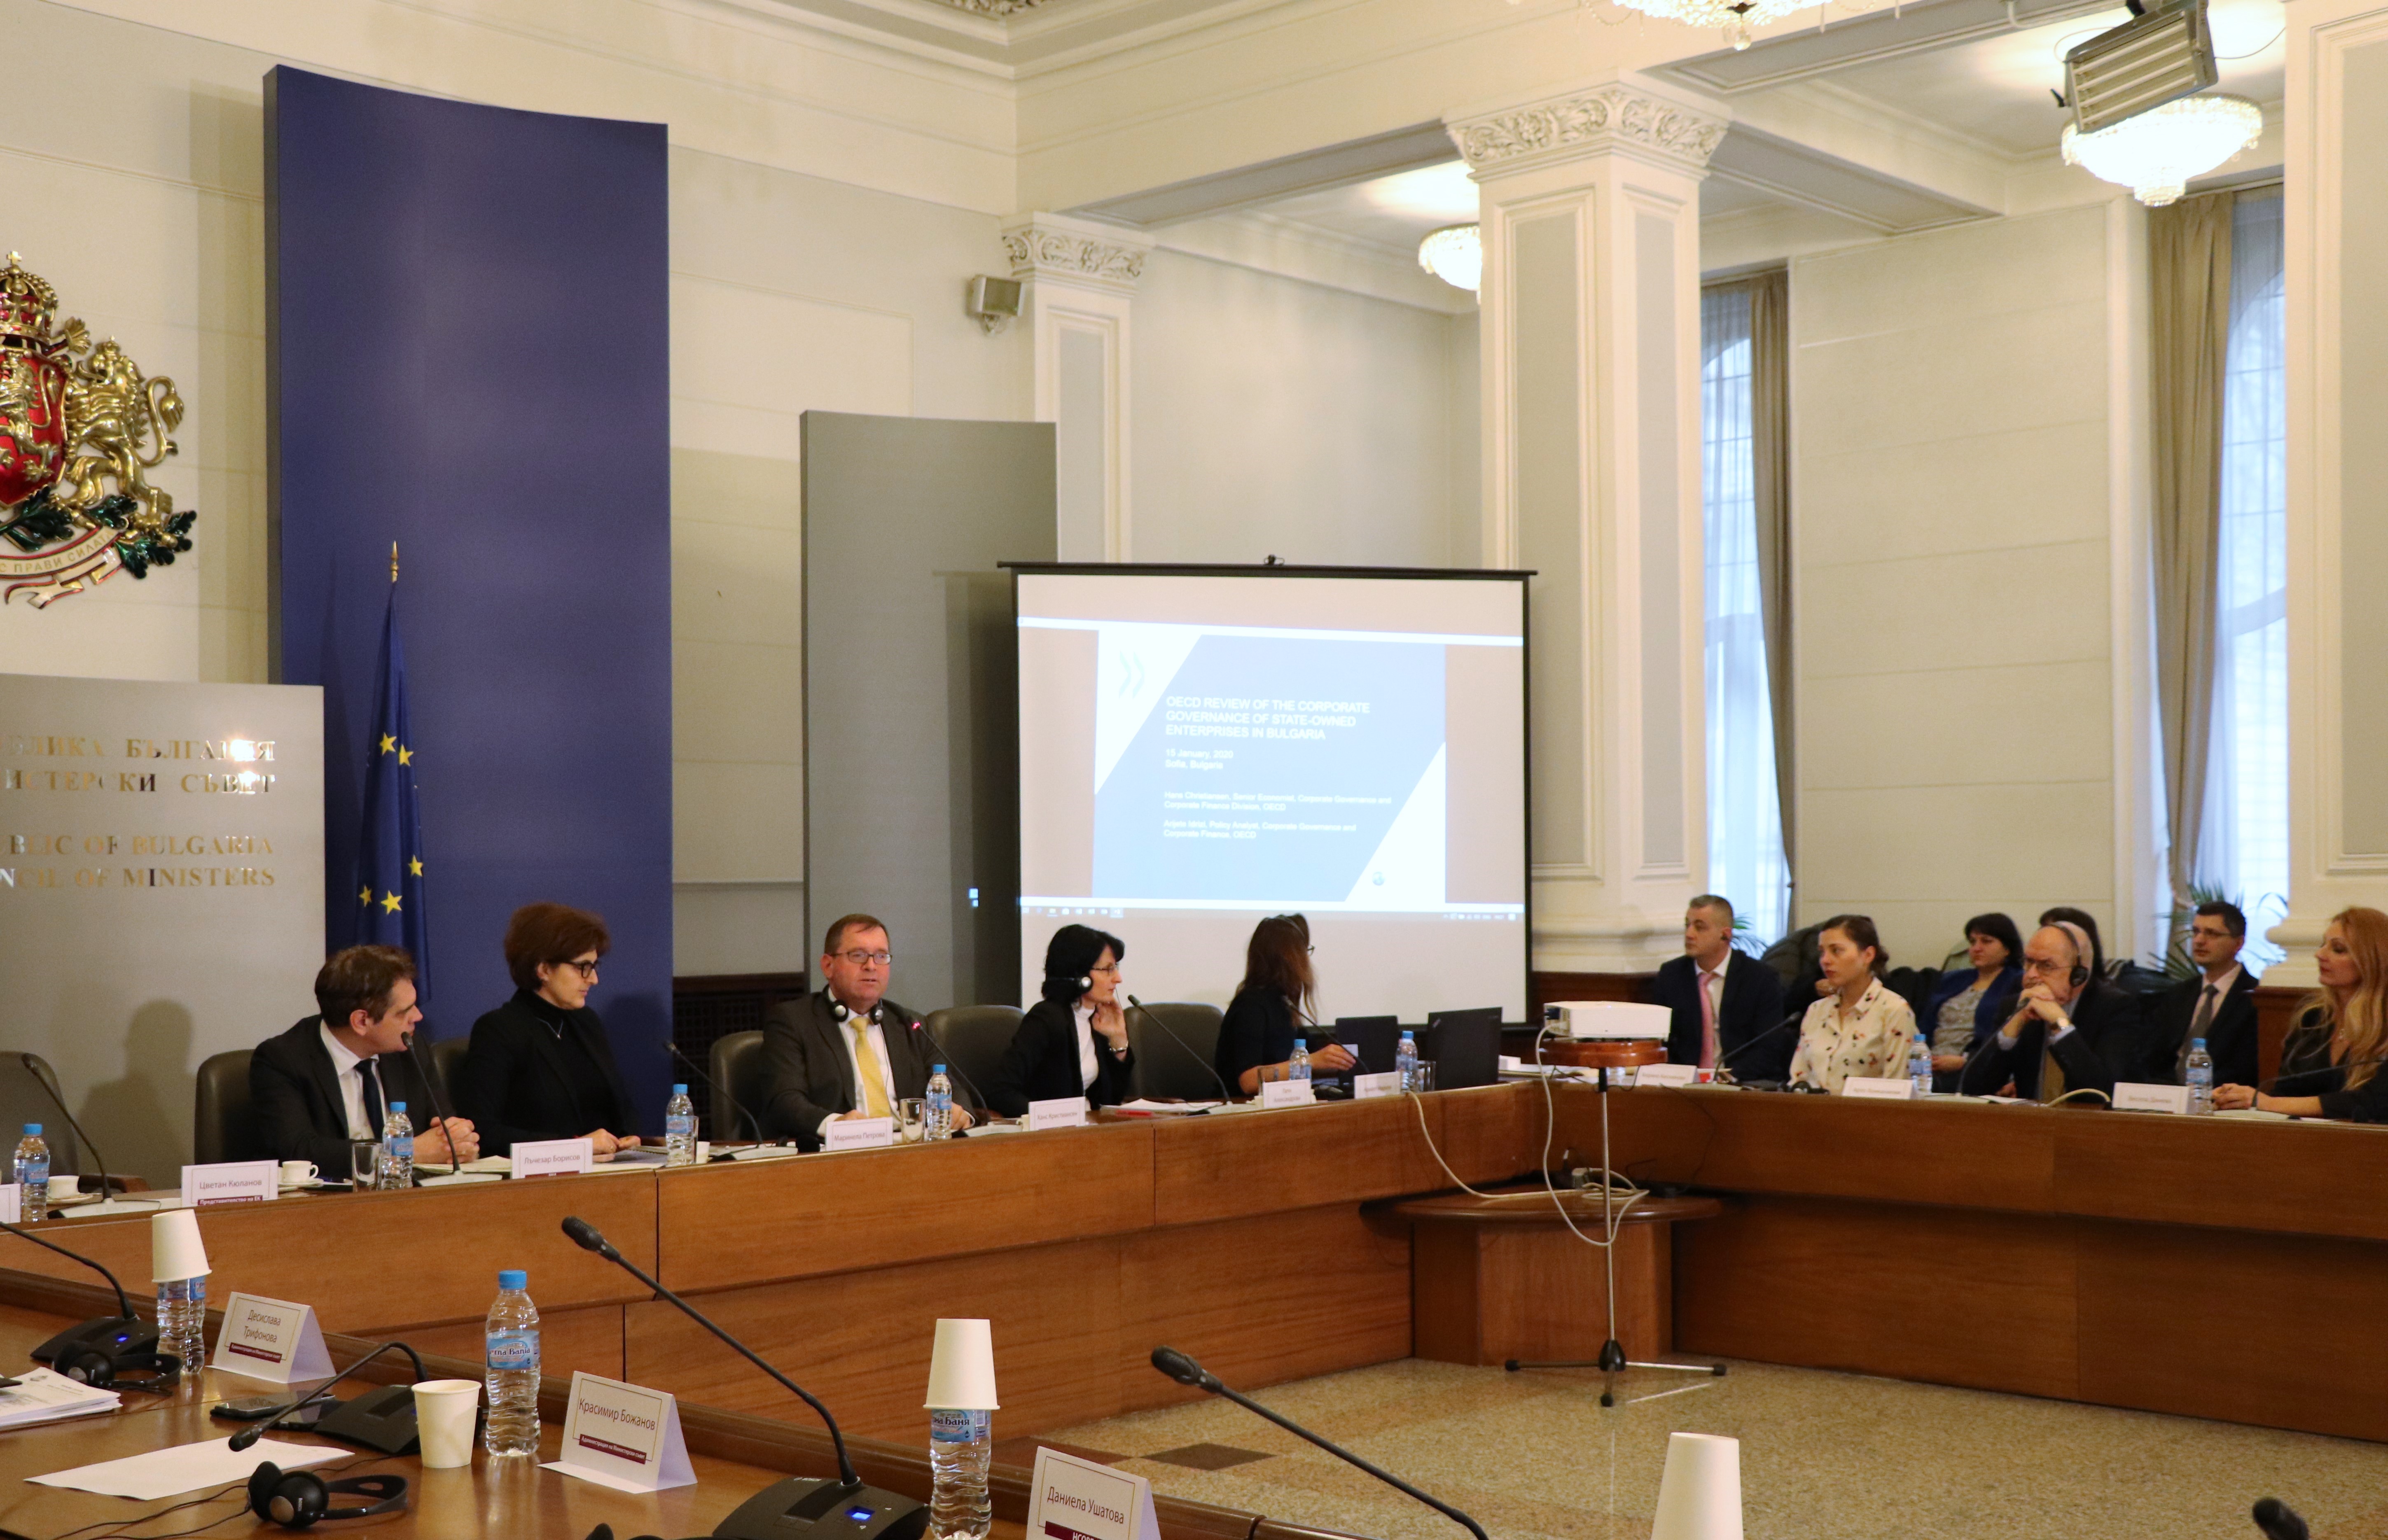 Deputy Minister of Finance Marinela Petrova, the Deputy Minister of Economy Latchezar Borisov, Hans Christiansen and Arijete Idrizi from the Secretariat to the OECD Working Party on State Ownership and Privatisation Practices